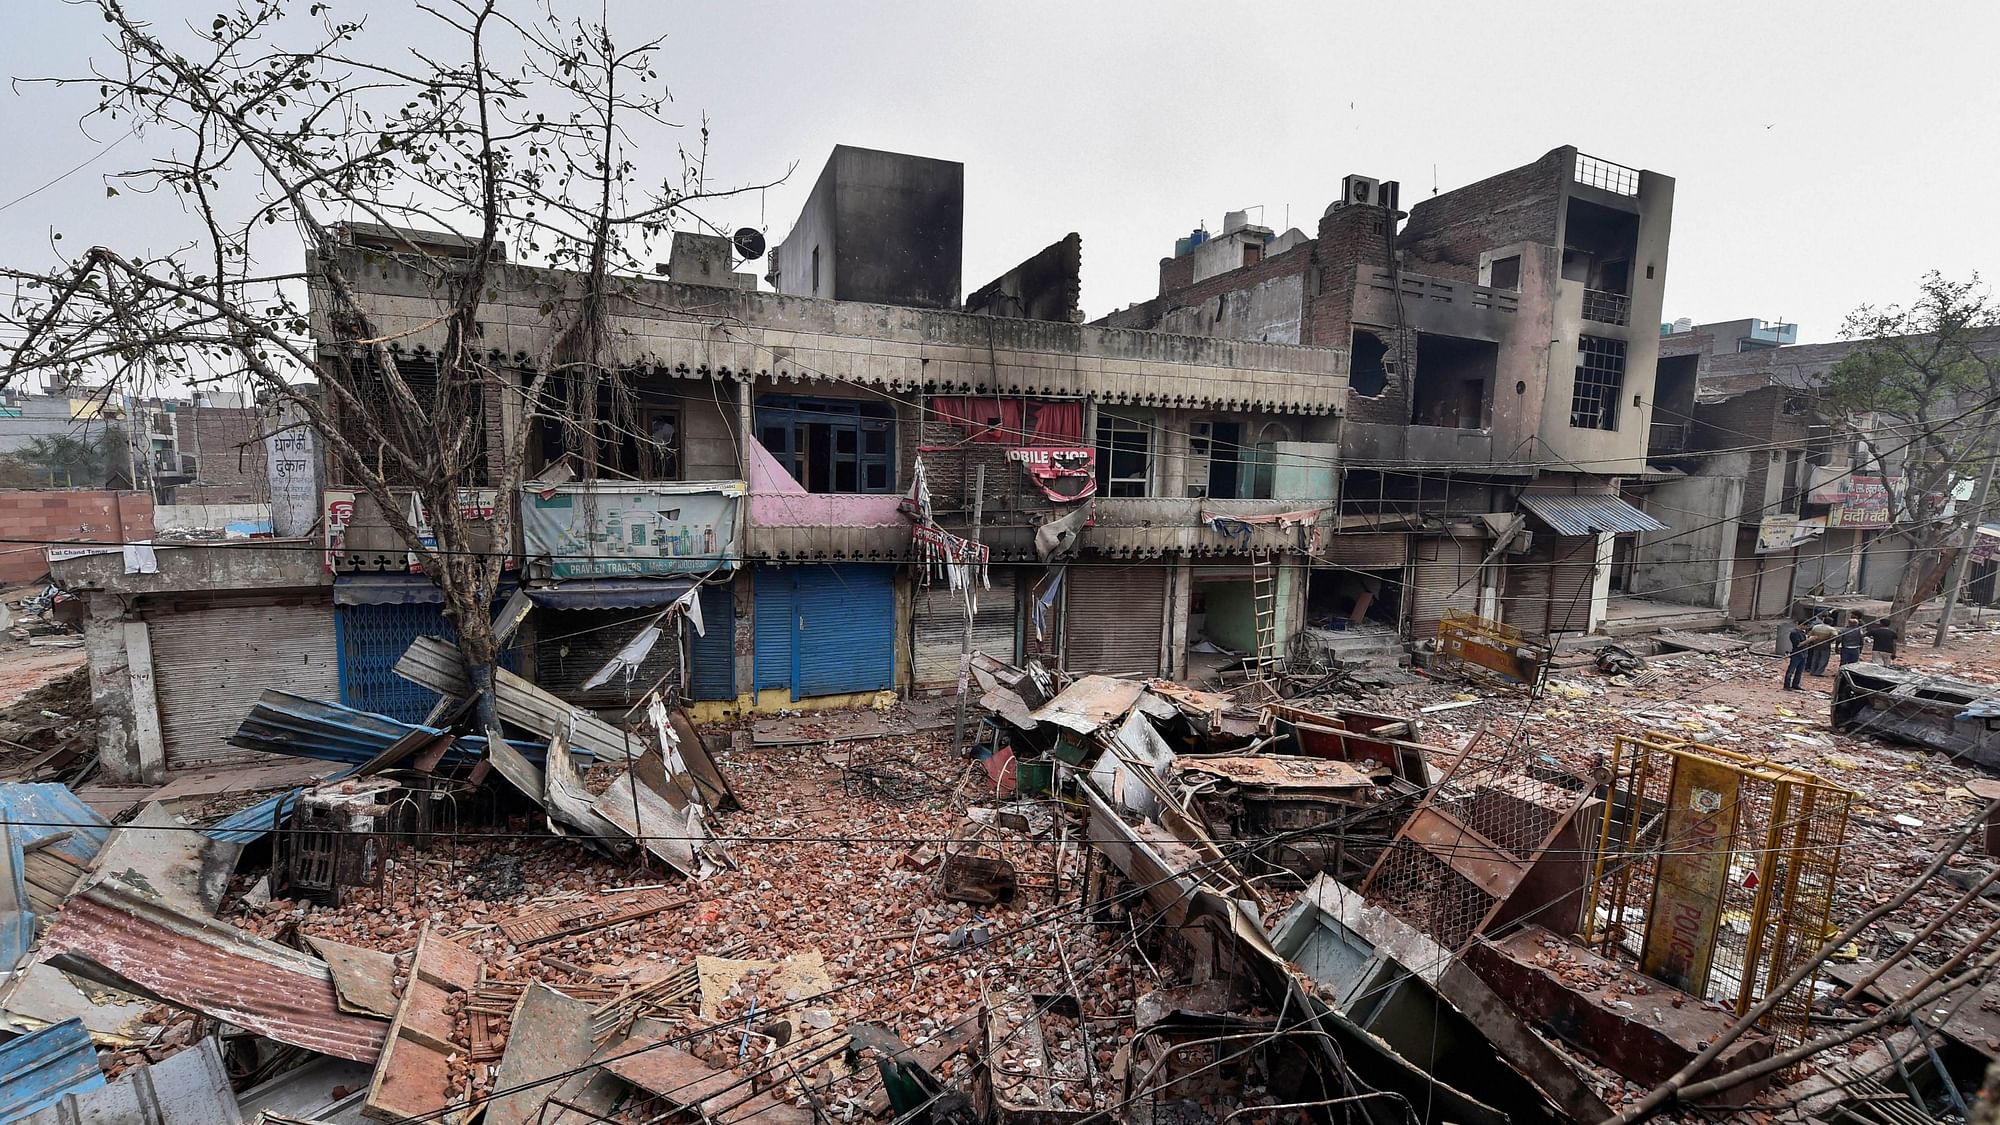 Scenes from northeast part of Delhi, where communal violence erupted on a massive scale.